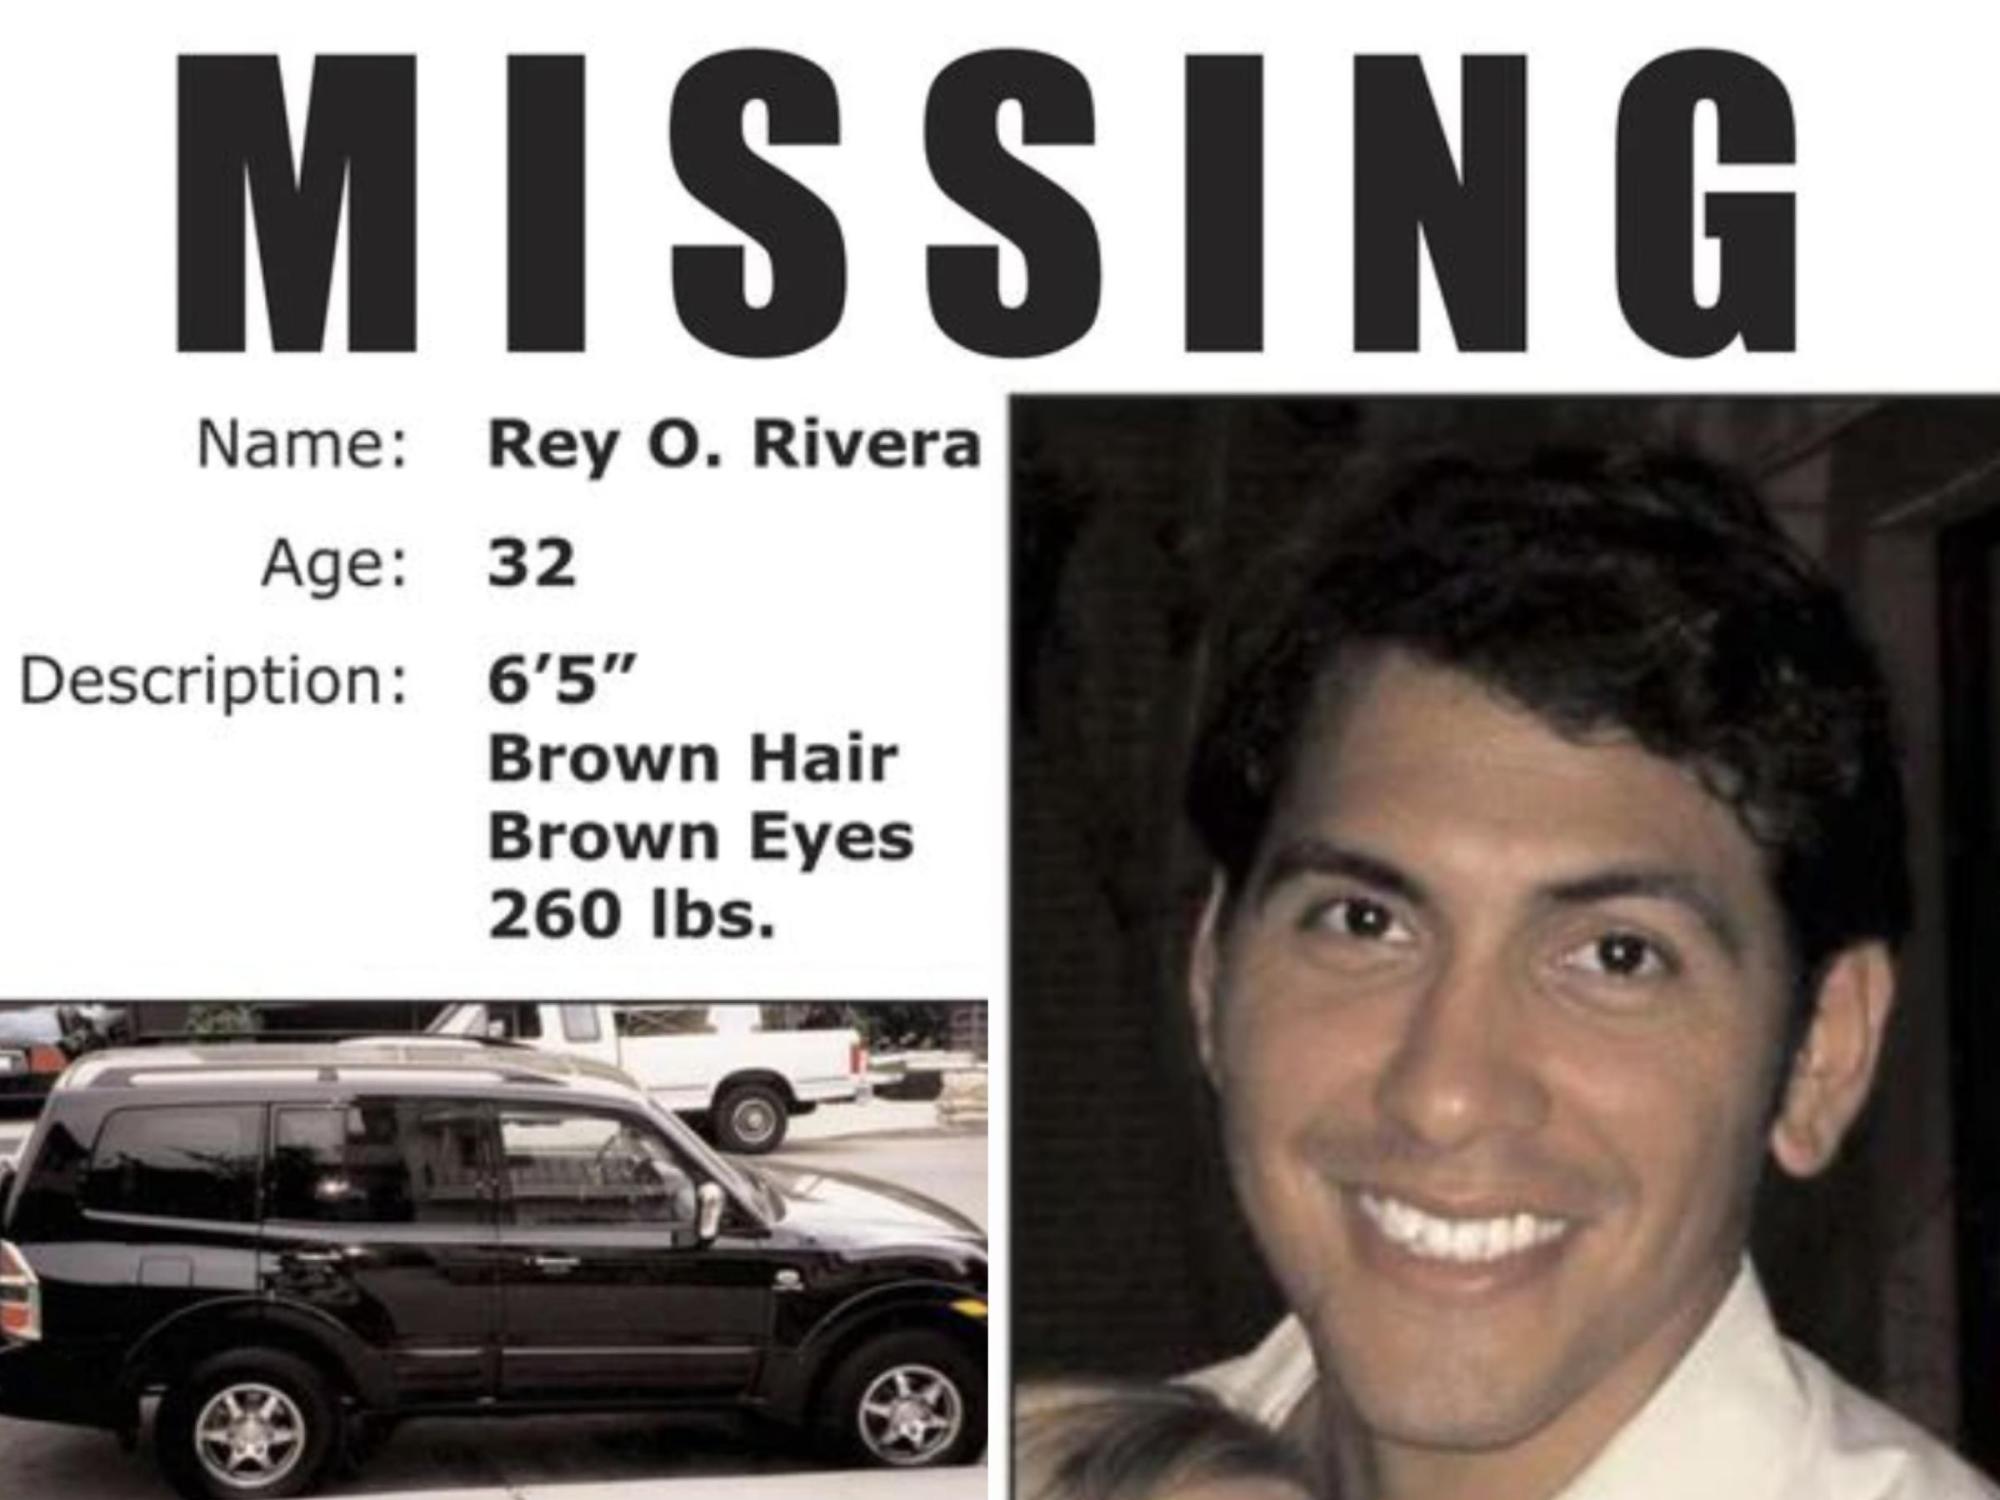 Photos from a poster asking for information about Rey Rivera's disappearance.